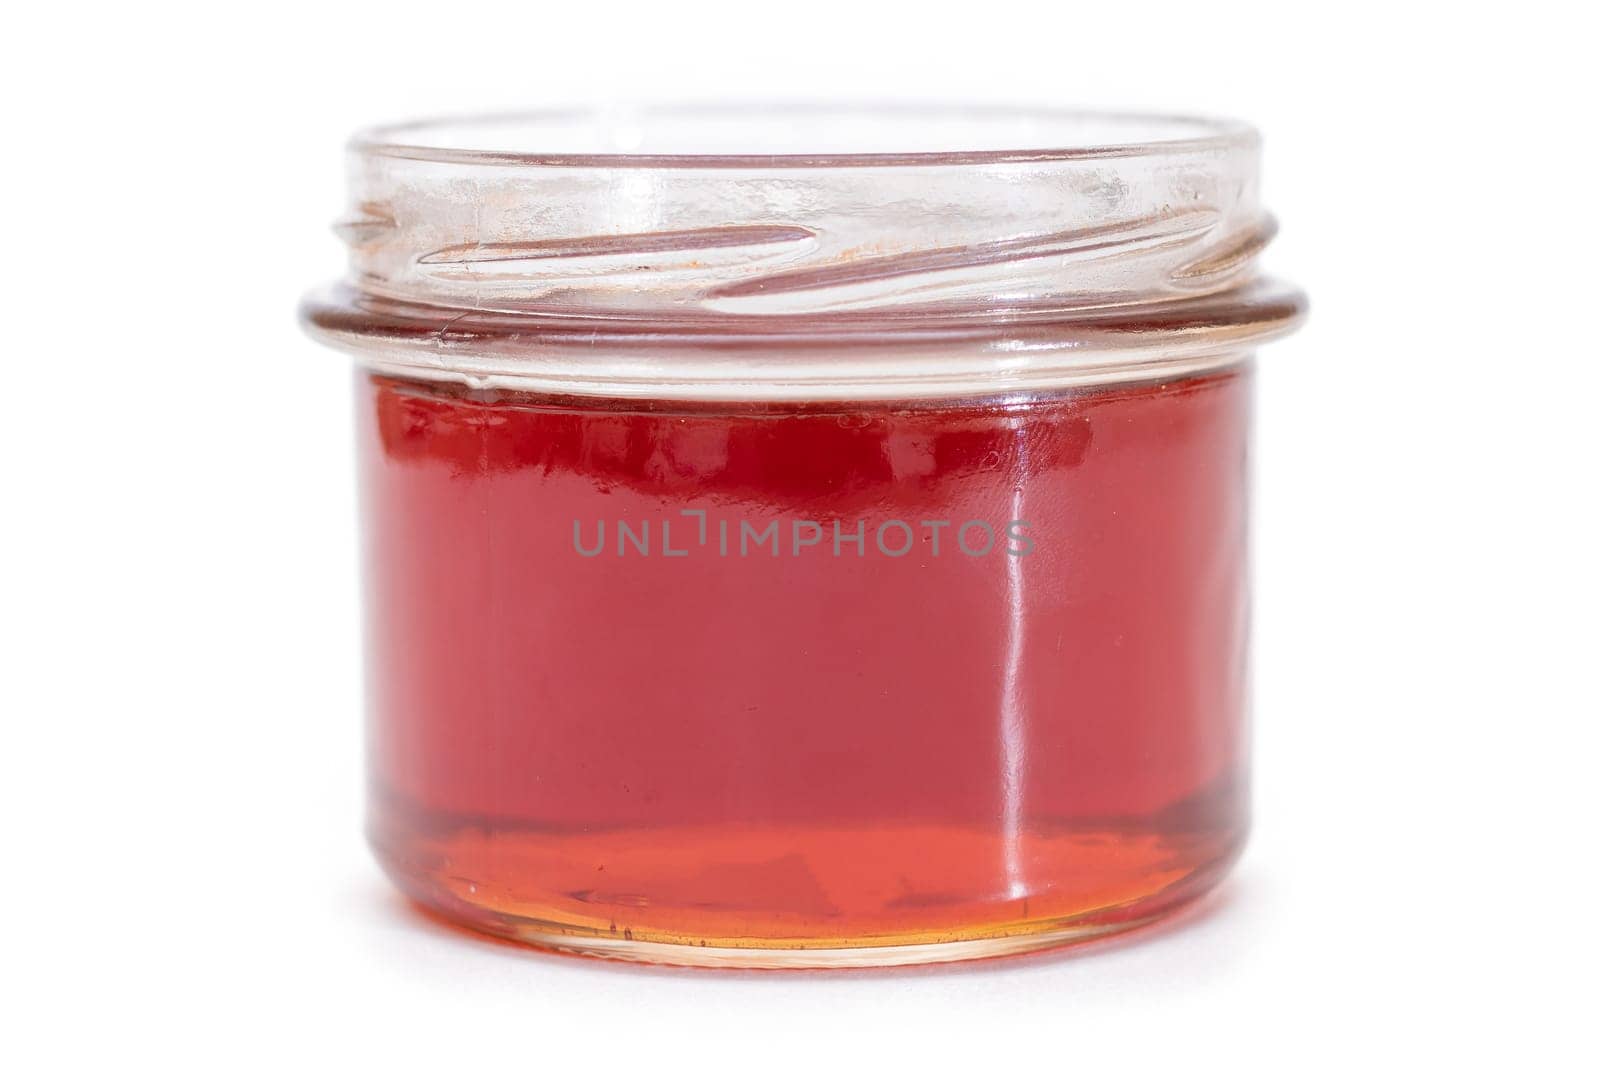 Dark Honey in a Small Glass Jar Isolated on White Background